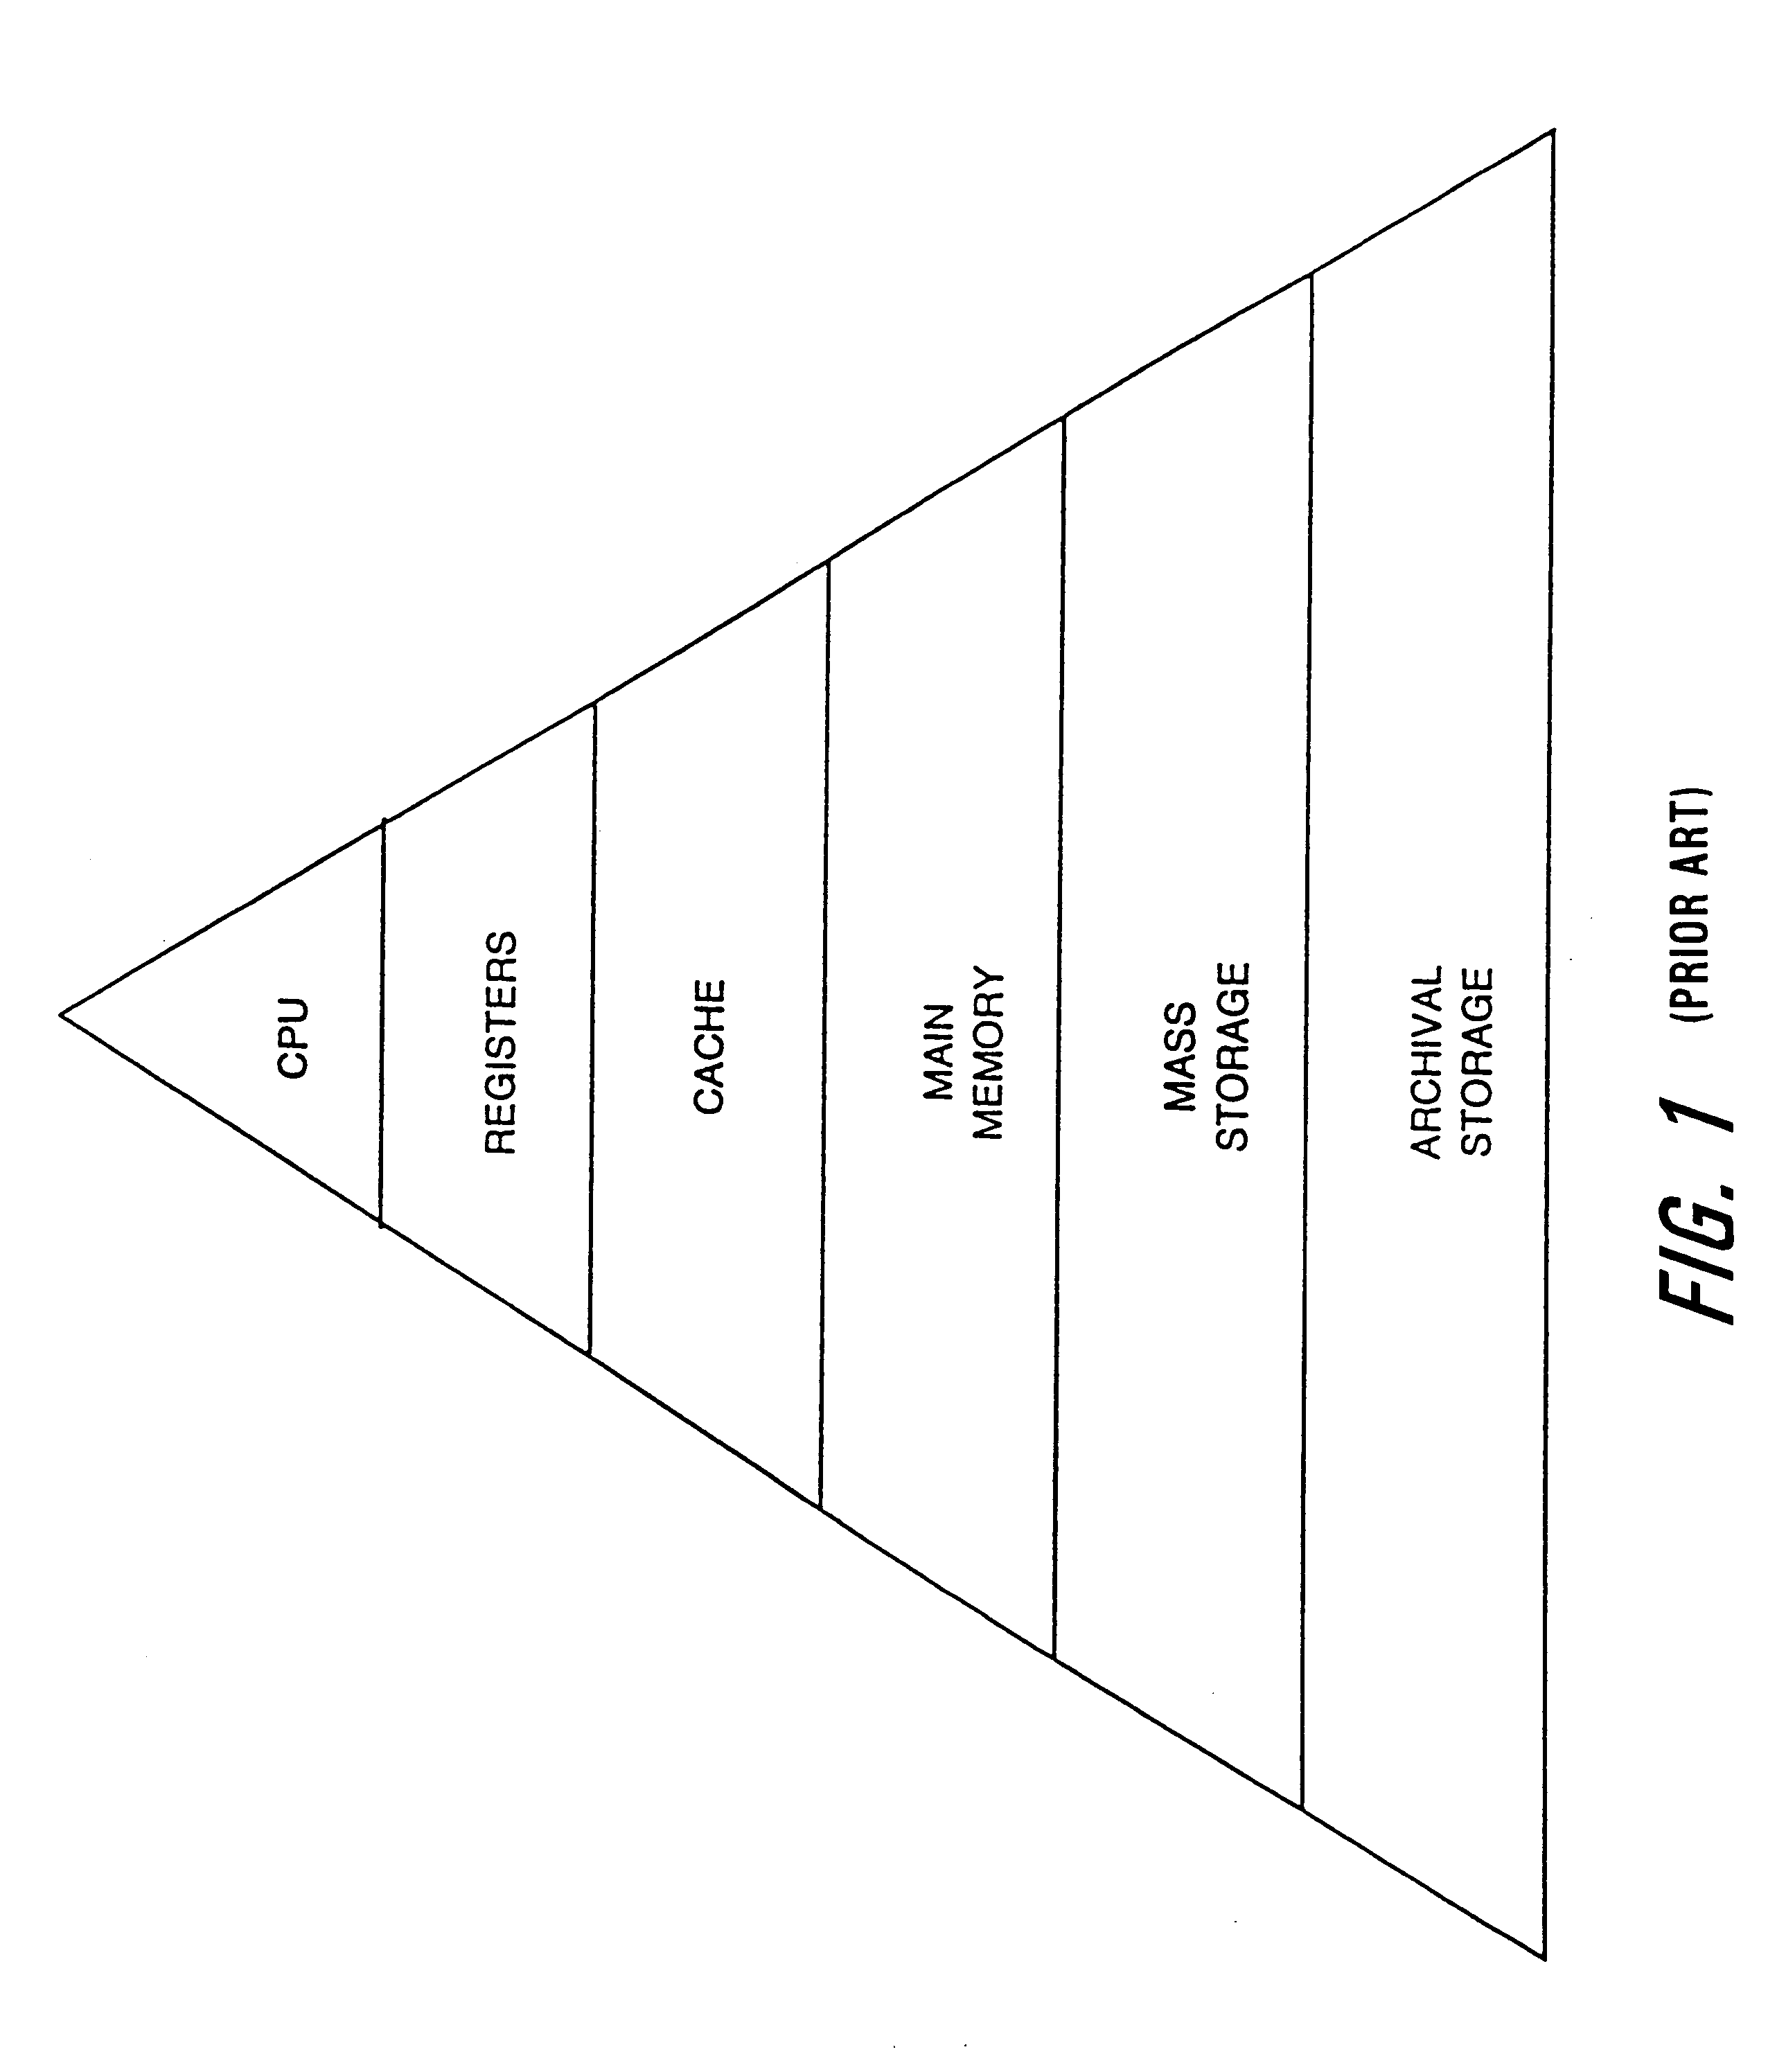 Method and architecture for data coherency in set-associative caches including heterogeneous cache sets having different characteristics